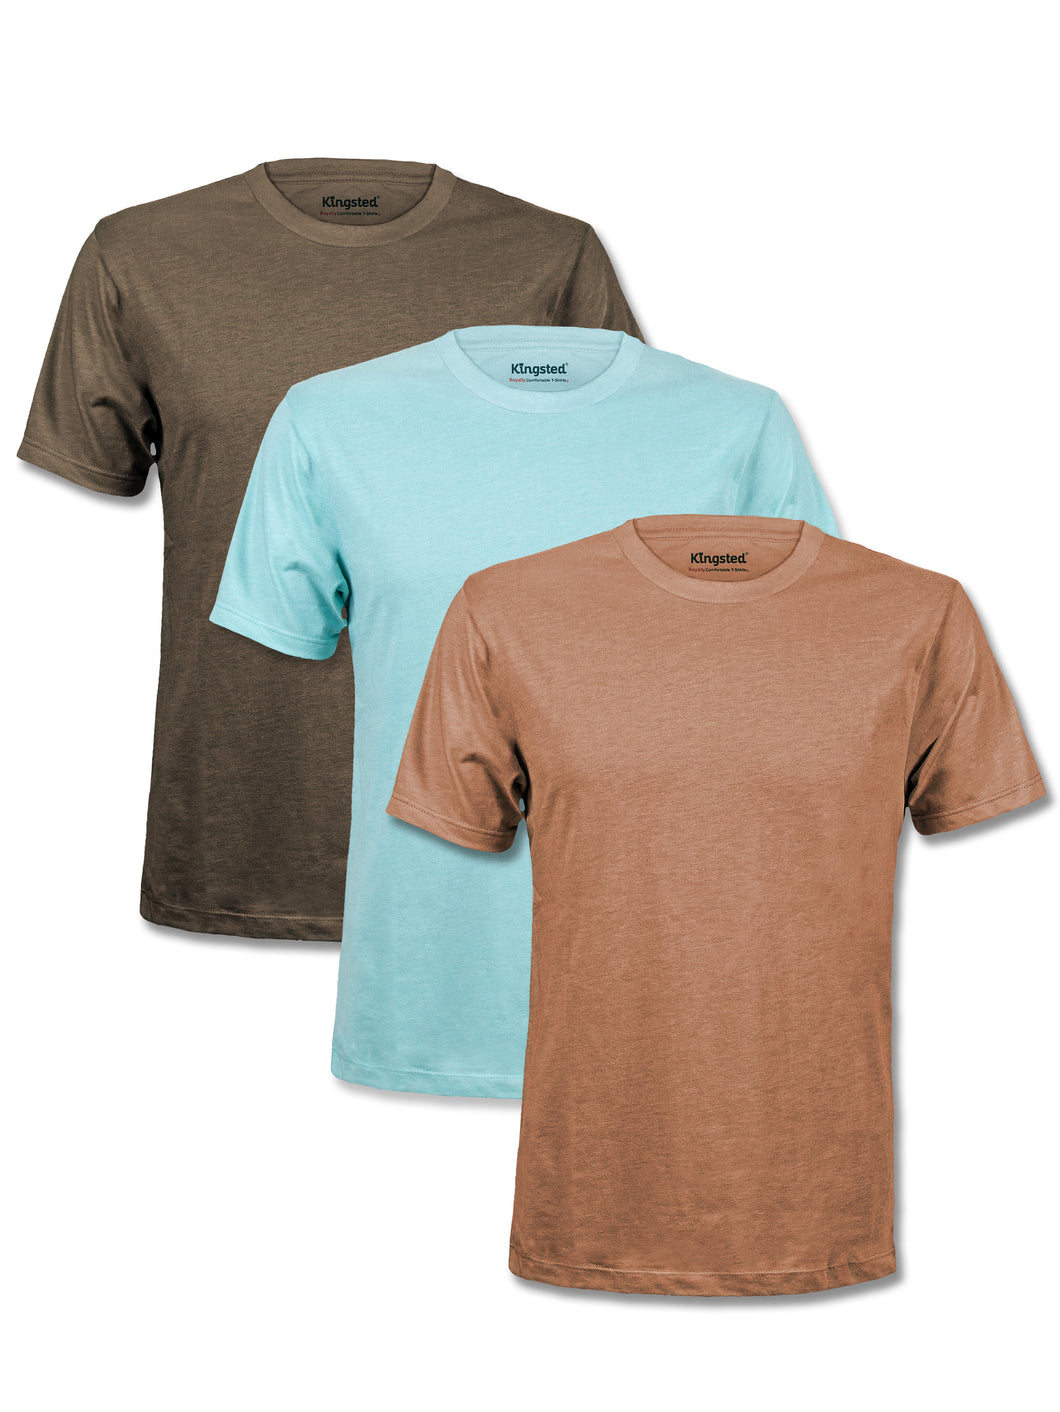 NATURAL - T-Shirt 3-Pack (CHOCOLATE, MOCHA, & TURQUOISE)